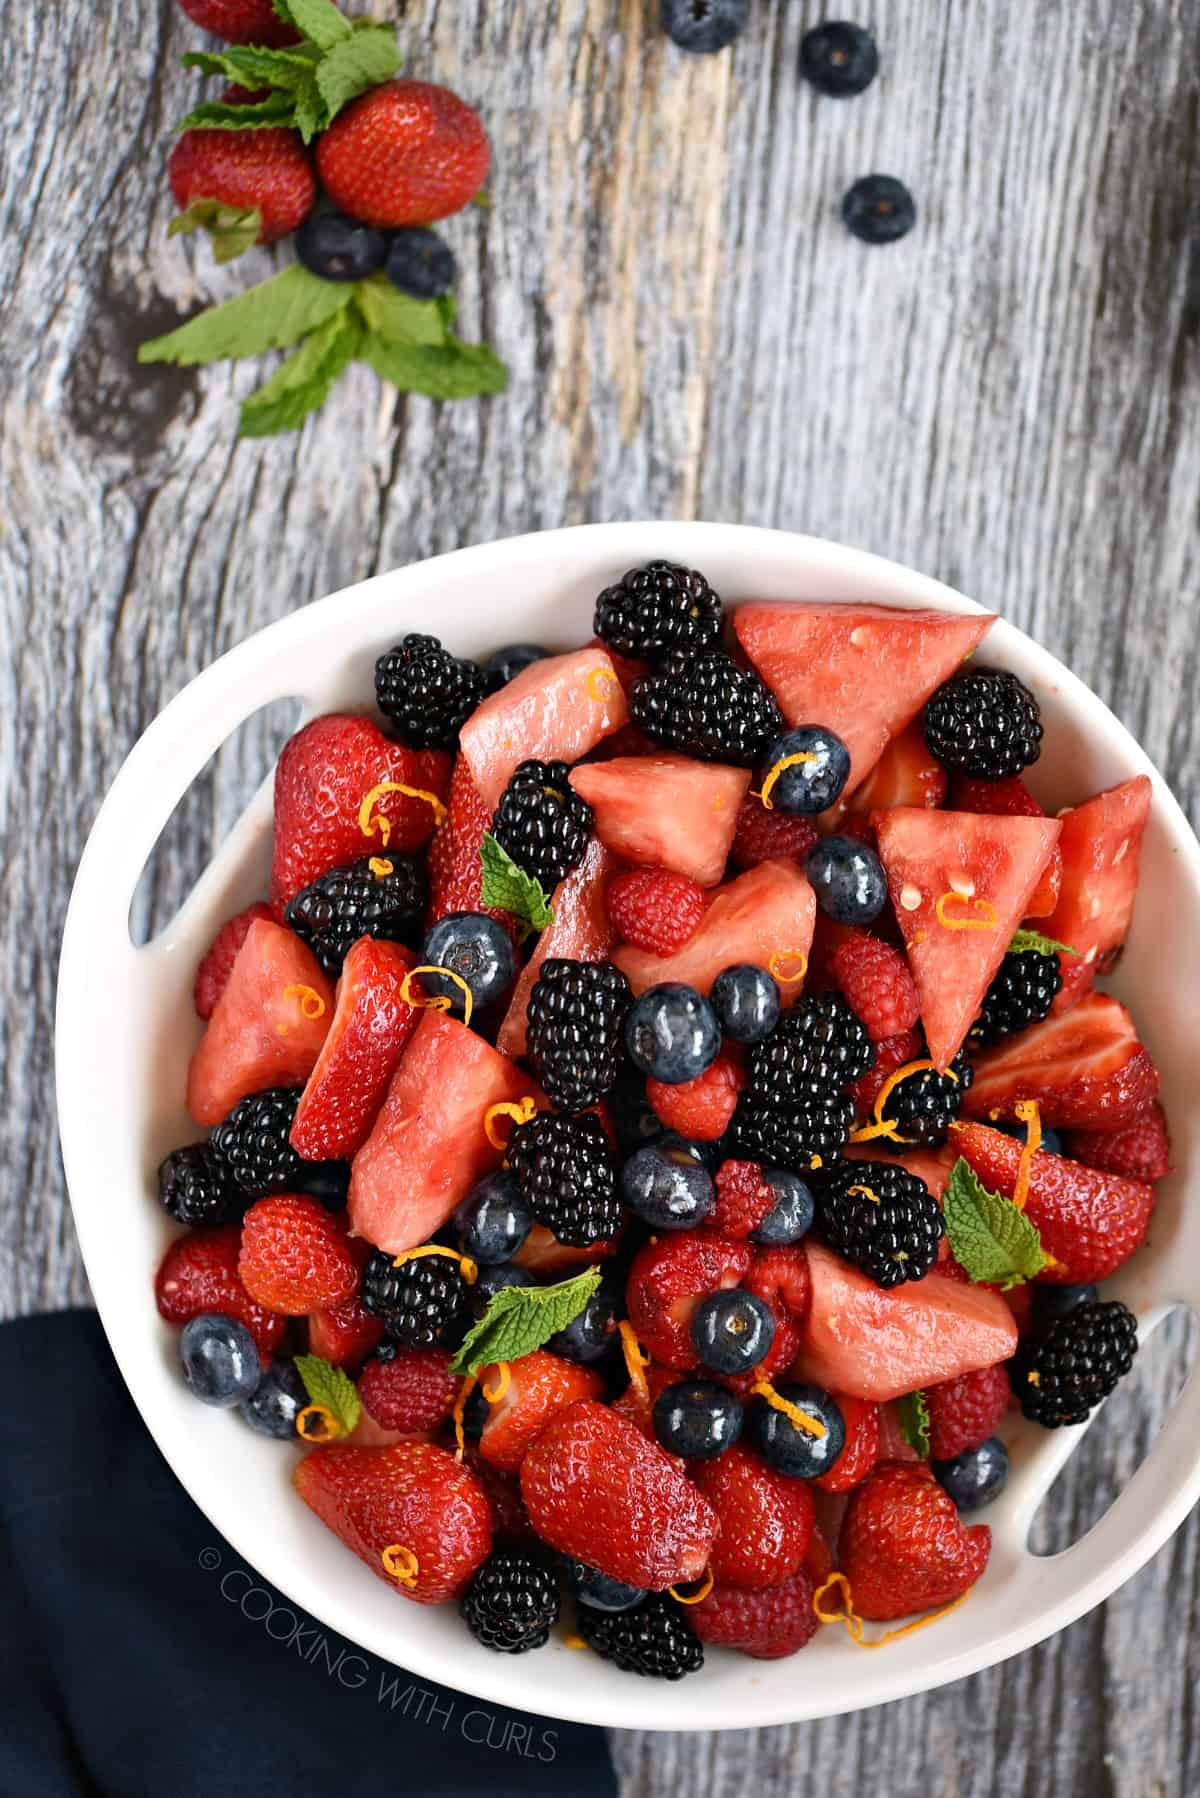 Looking down on watermelon, blackberries, raspberries, strawberries and blueberries tossed together in a large white serving bowl.